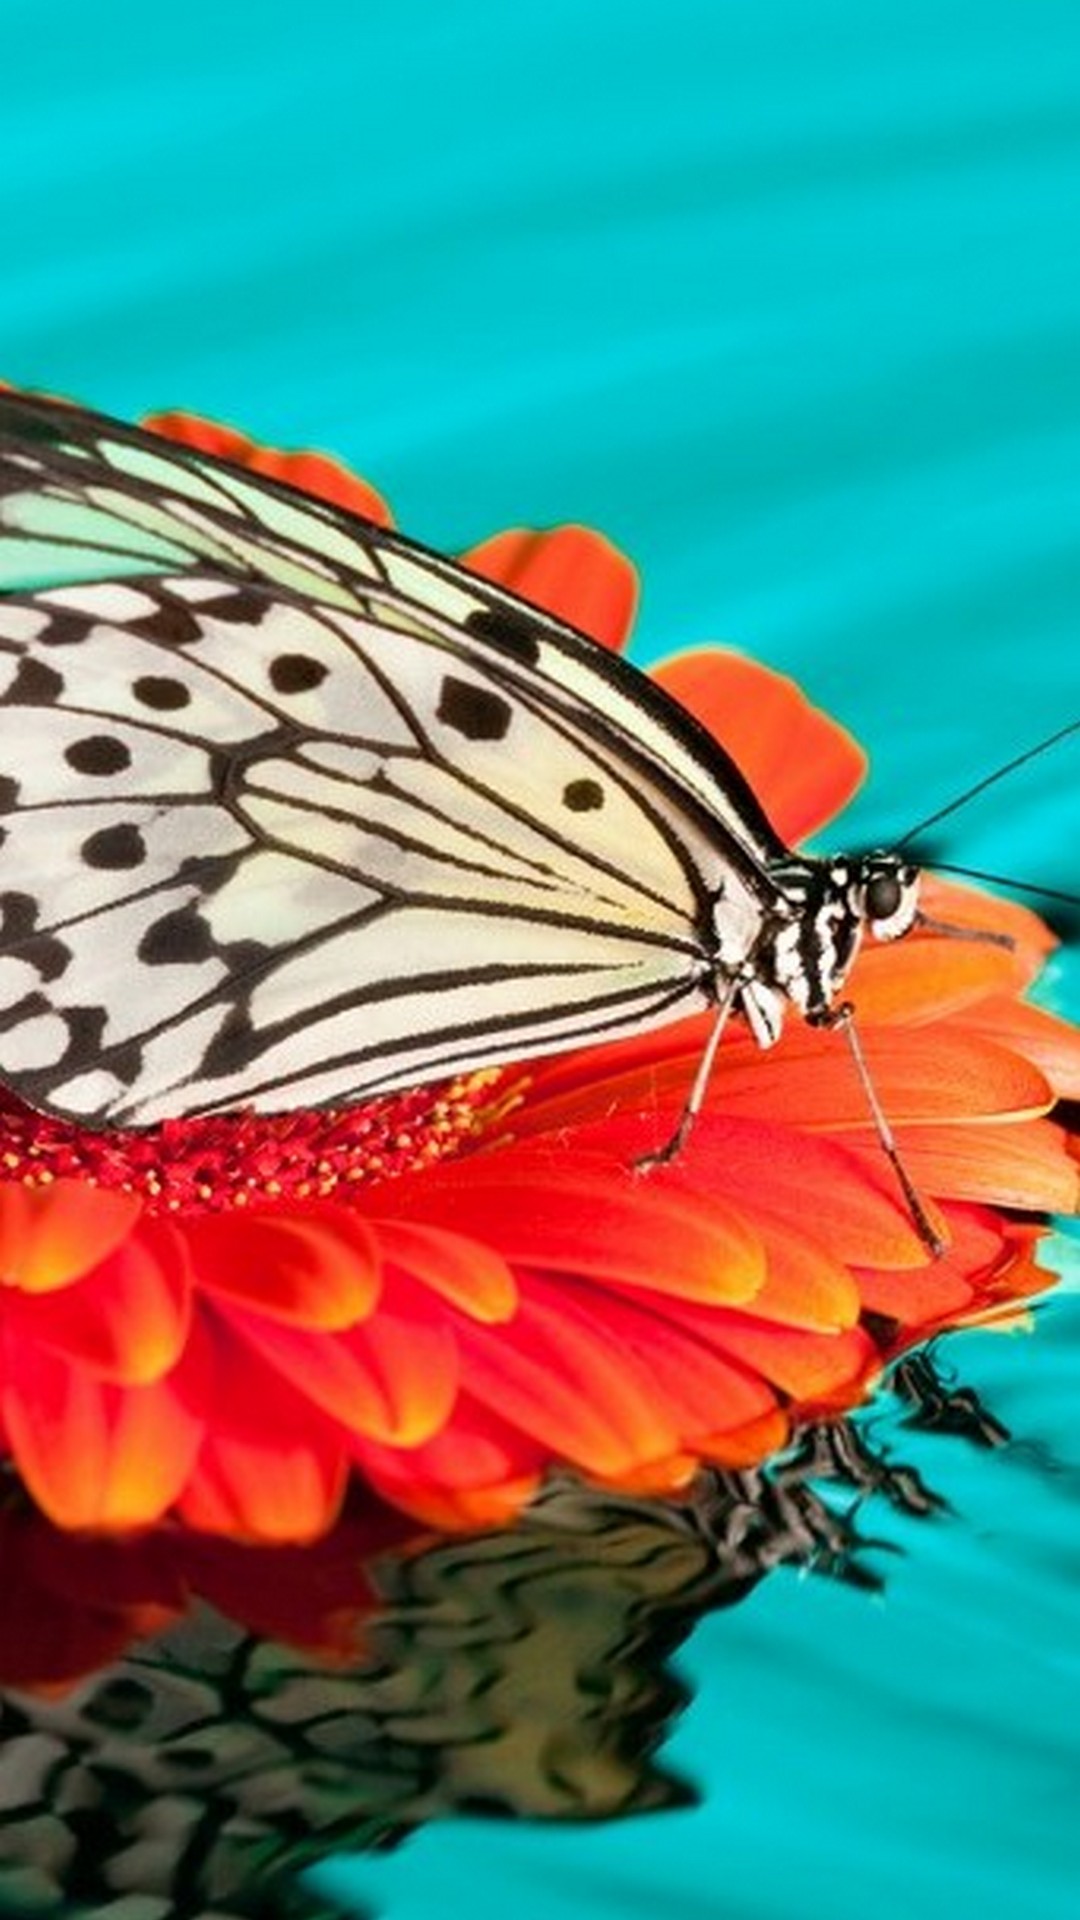 Butterfly Backgrounds For Android with HD resolution 1080x1920